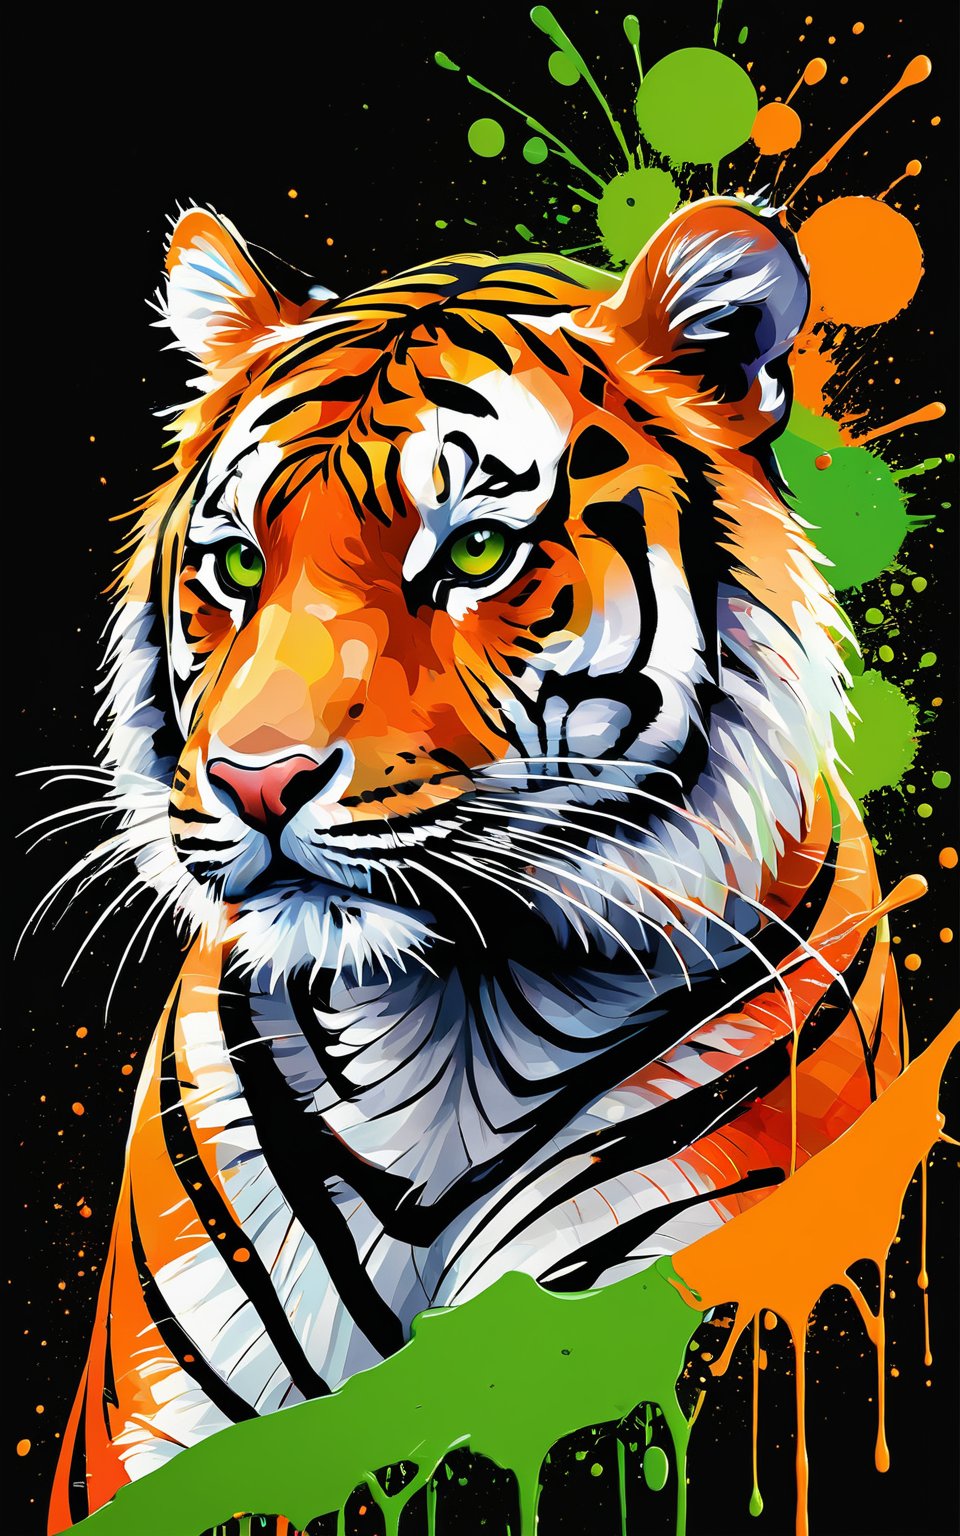 (Artistic bird illustration, high resolution, painted style, colored paint splatters), a [Tigger] depicted in a painted style with dynamic and vibrant paint splatters. The main colors are [orange] and [green], set against a [black] background. The artwork captures the lively essence of the [Tigger] through the use of bold paint splatters, creating a visually striking and energetic composition.